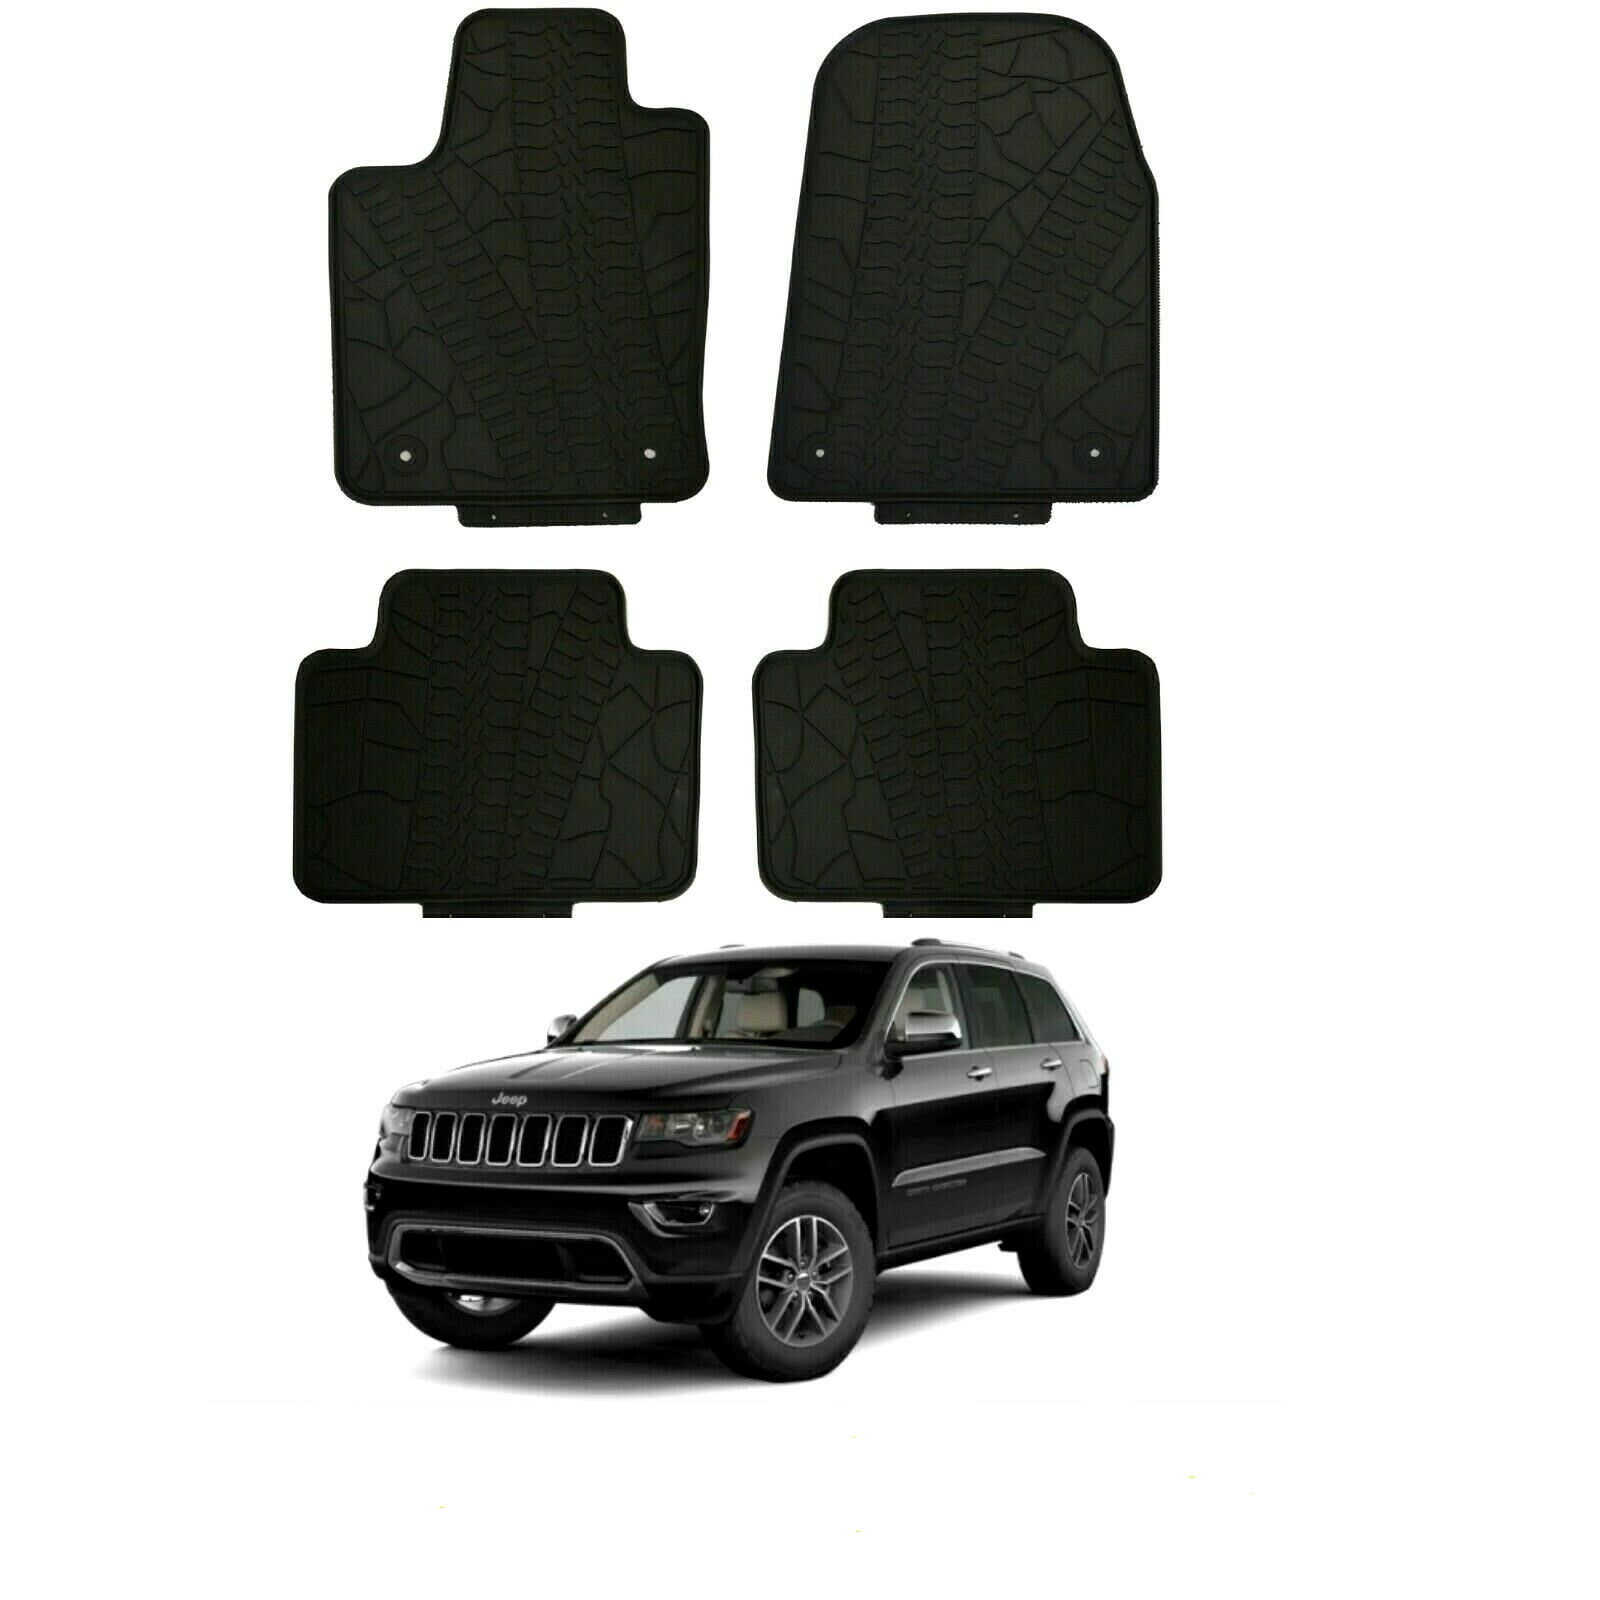 2016 Jeep Grand Cherokee All Weather Mats